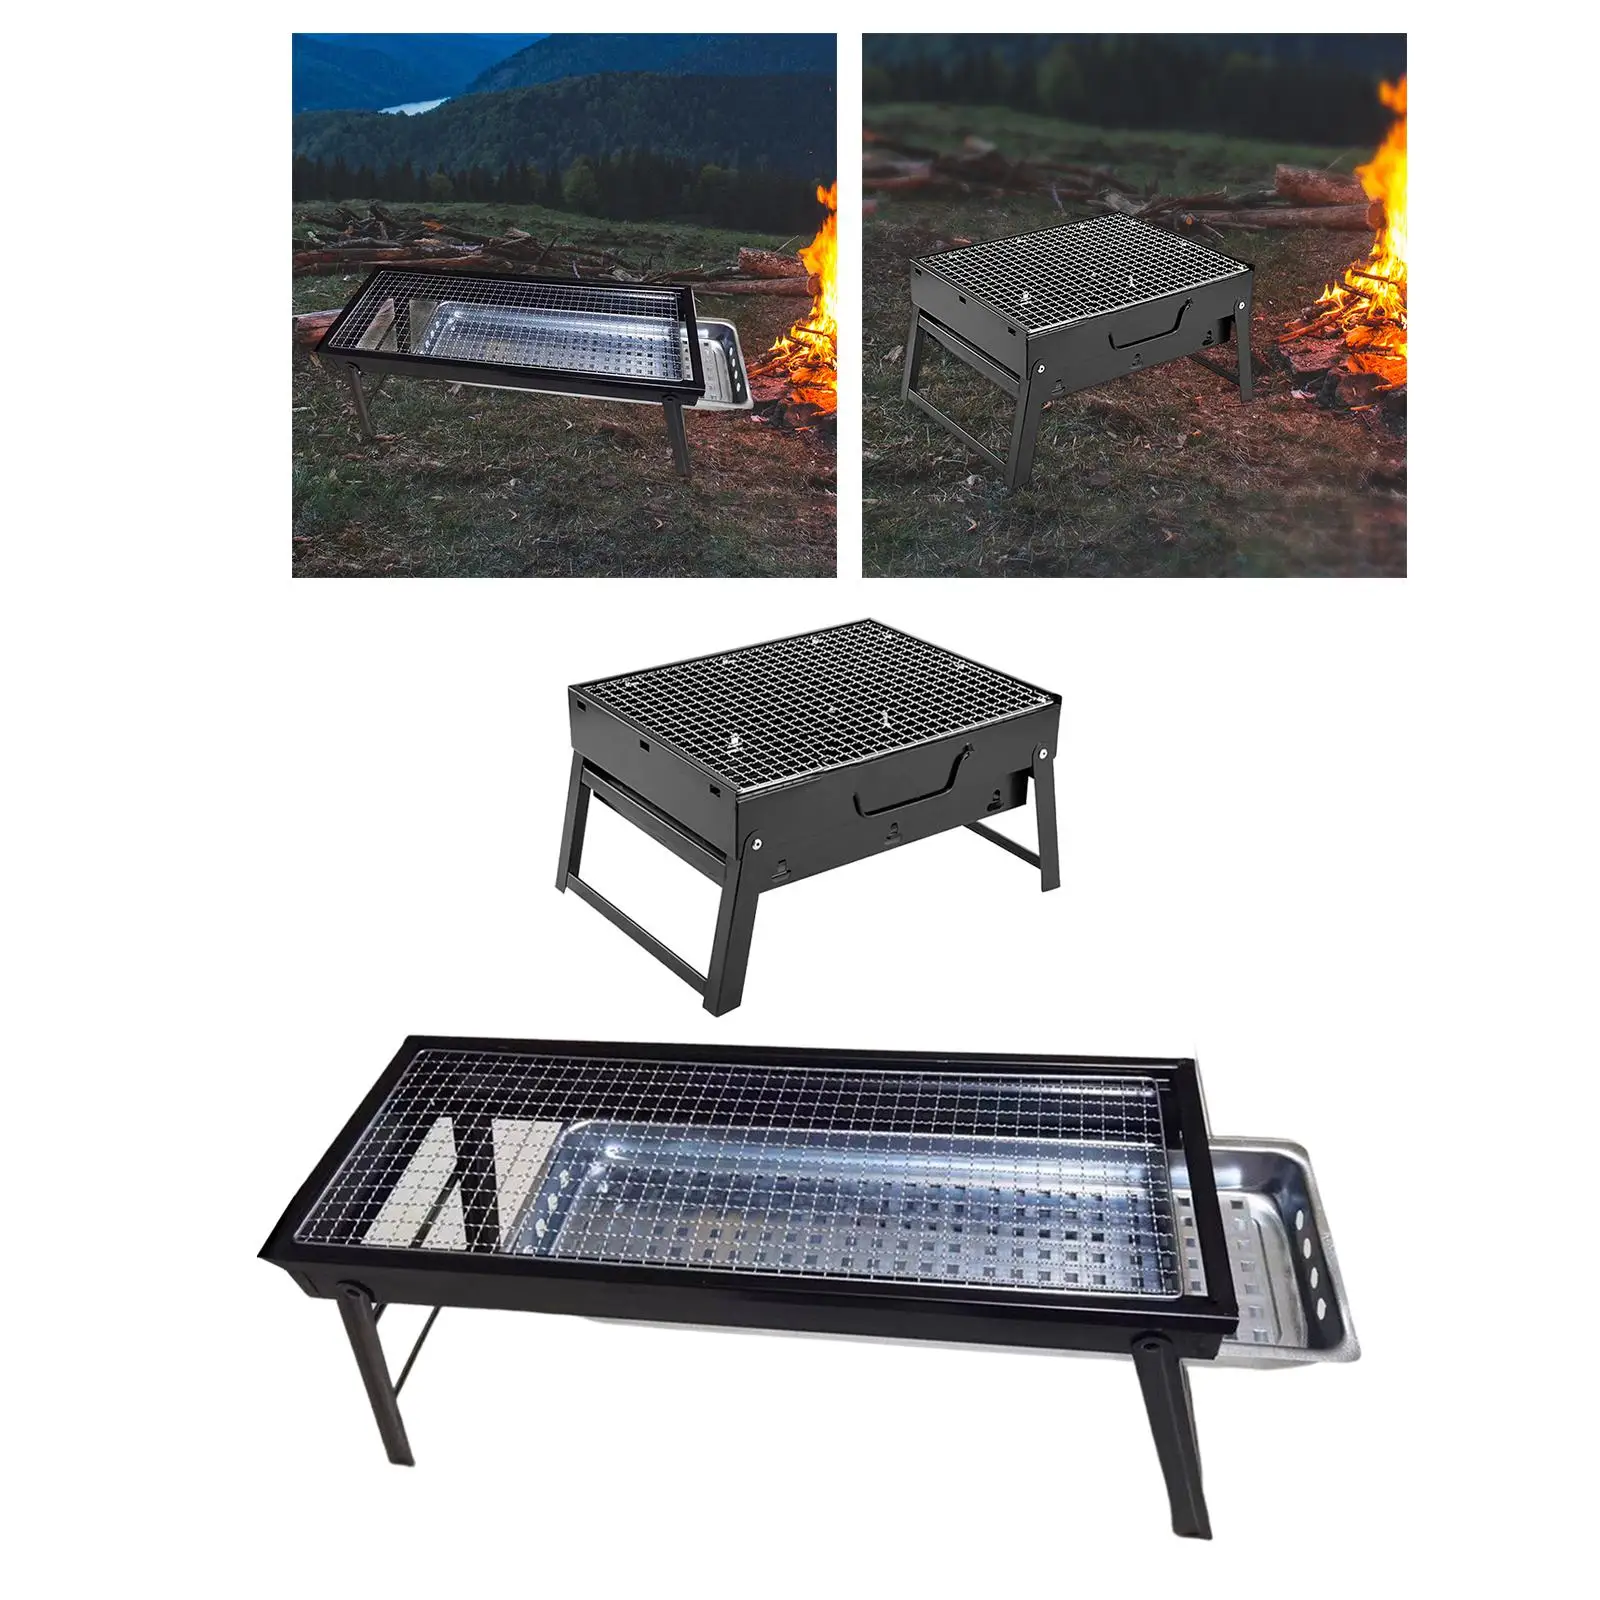 Portable BBQ Grill Stove Foldable Tabletop Barbecue Charcoal Grill for Outdoor Hiking BBQ Equipment Picnic